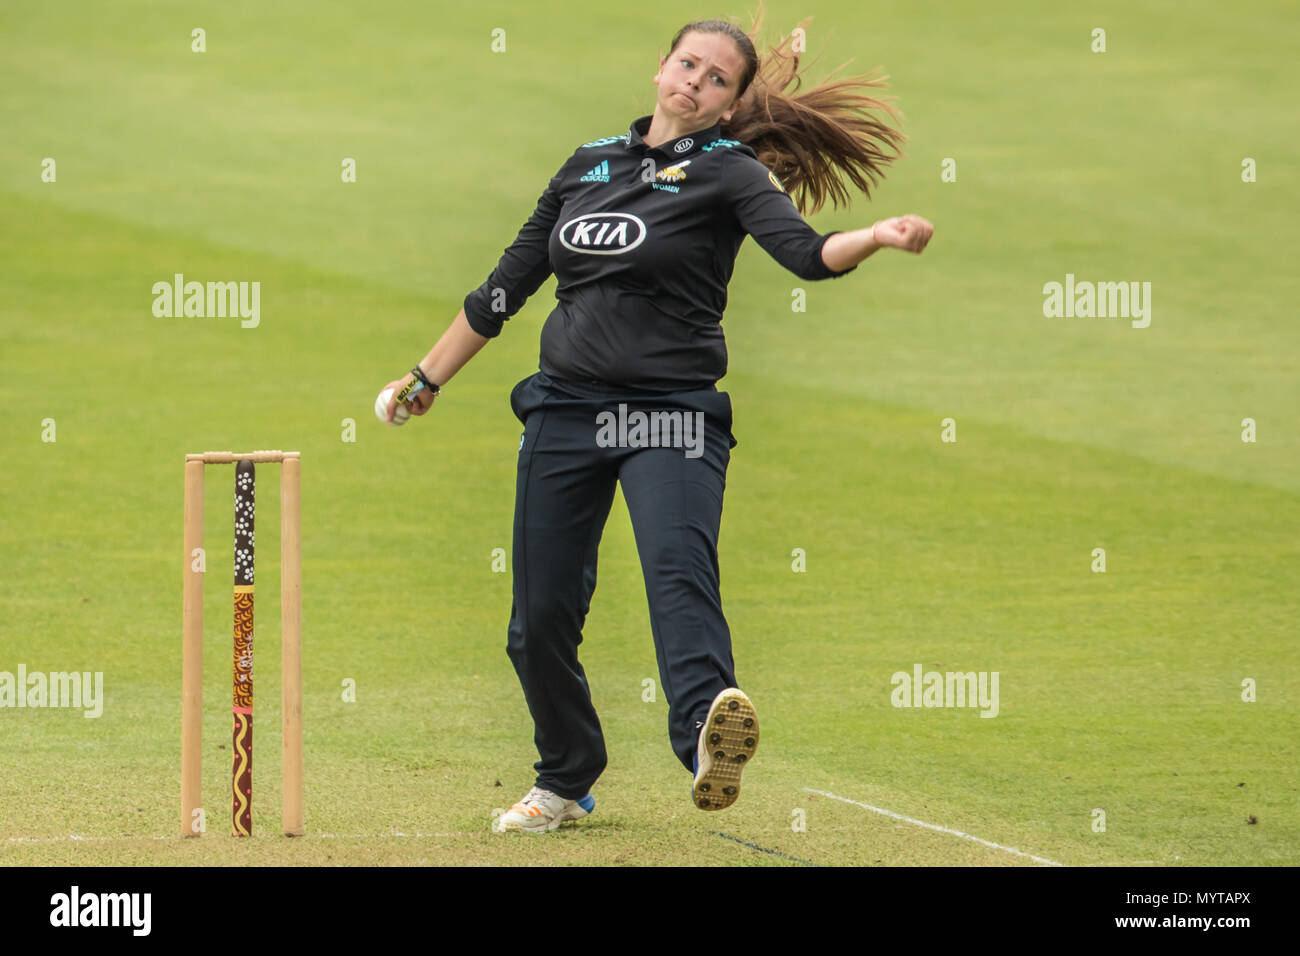 London, UK. 7 June, 2018. Molly Sellars bowling for Surrey Women against the Aboriginal XI at the Oval. The game was part of the celebration of 150 years since the first Aboriginal cricket tour to England. This is the first ever Aboriginal Womens tour to England. David Rowe/ Alamy Live News Stock Photo